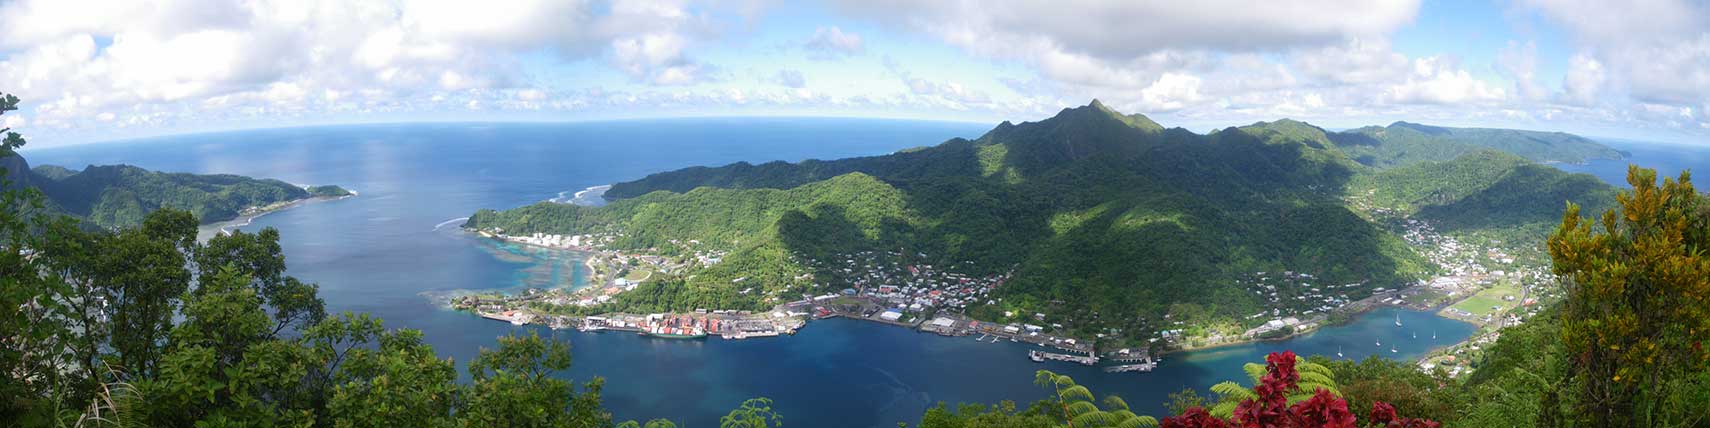 Pago Pago seen from Mount 'Alava, National Park of American Samoa.